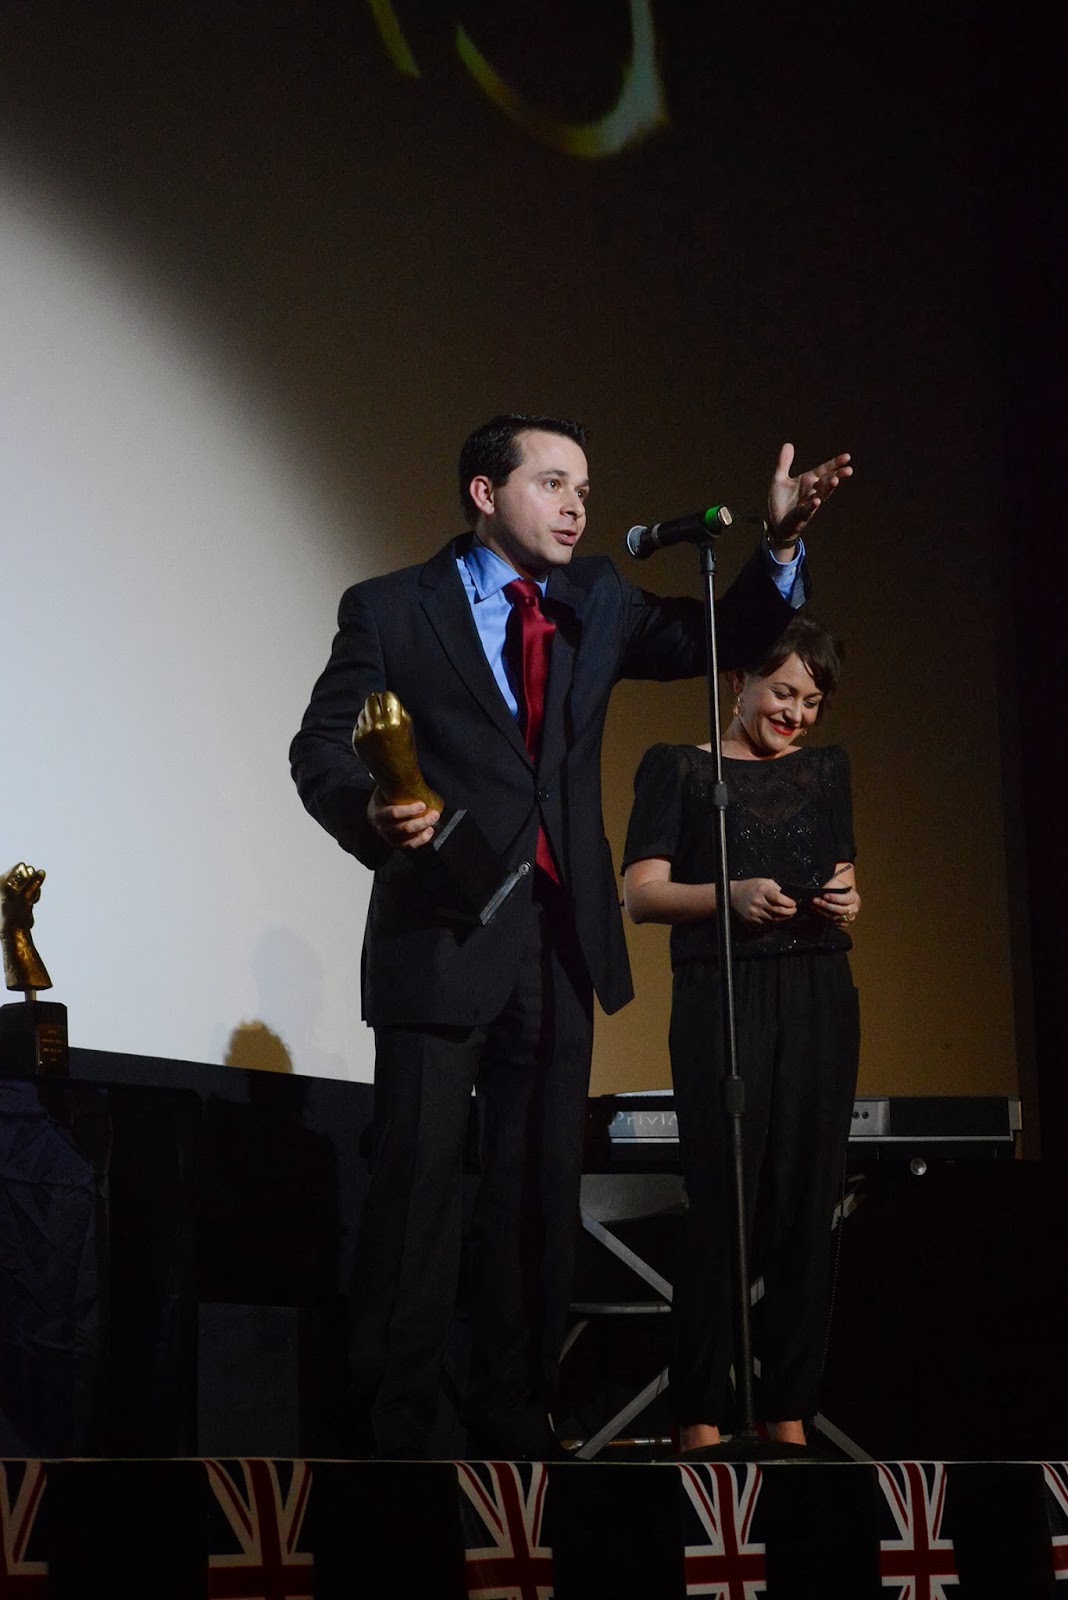 Accepting the Best Whactor Award at the 2014 TOSCAR Awards at the Egyptian Theatre in Hollywood.